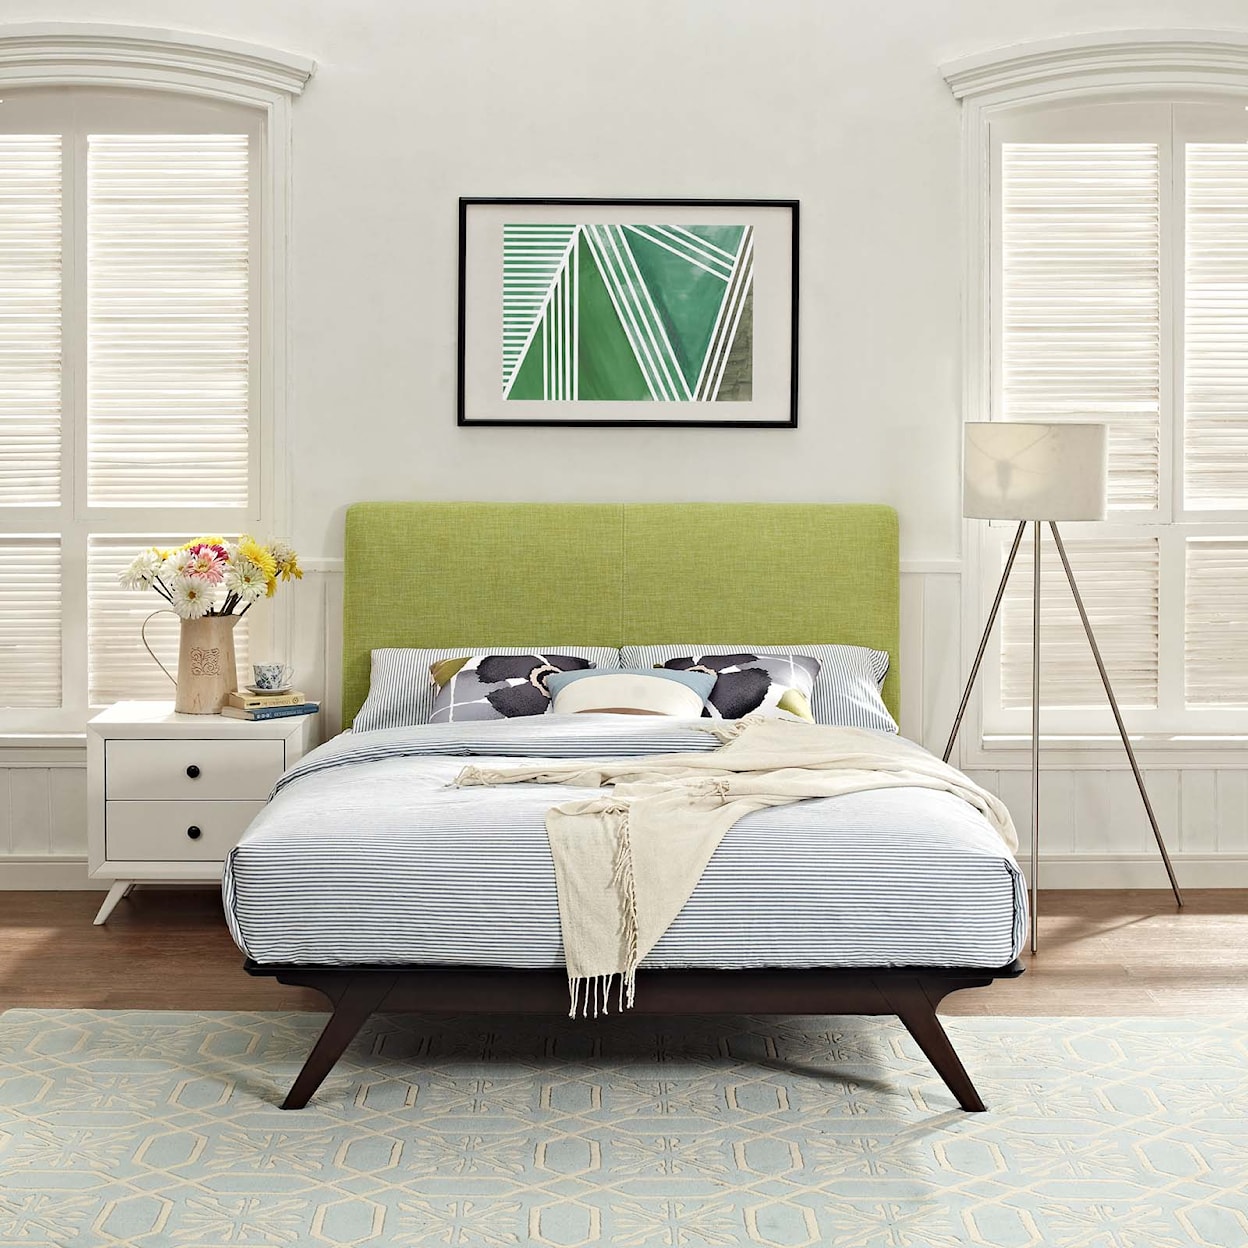 Modway Tracy Queen Bed